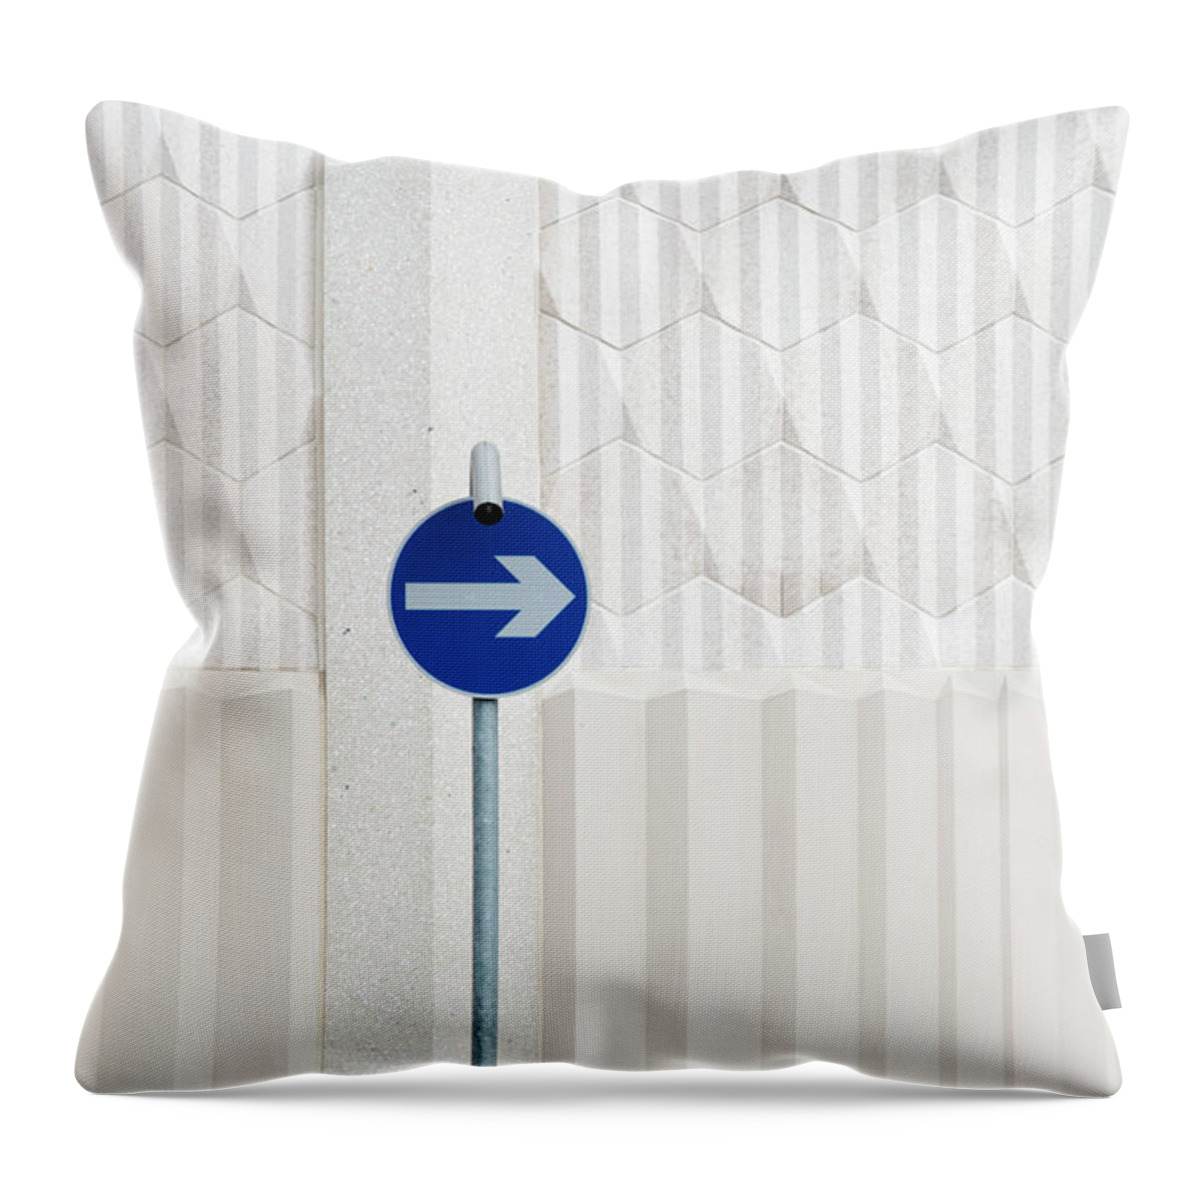 Urban Throw Pillow featuring the photograph One Way 2 by Stuart Allen